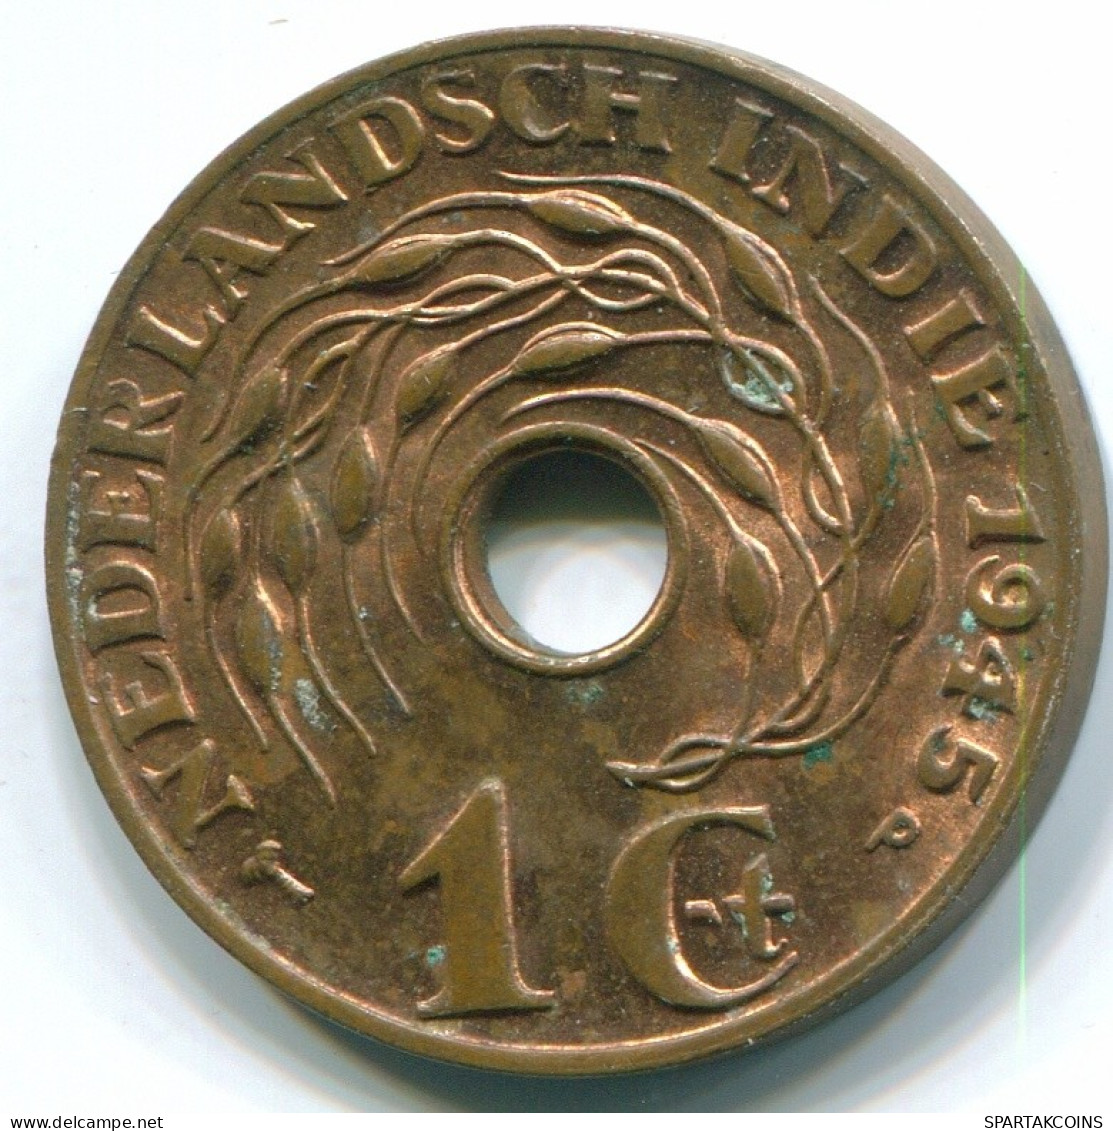 1 CENT 1945 P NETHERLANDS EAST INDIES INDONESIA Bronze Colonial Coin #S10355.U.A - Dutch East Indies